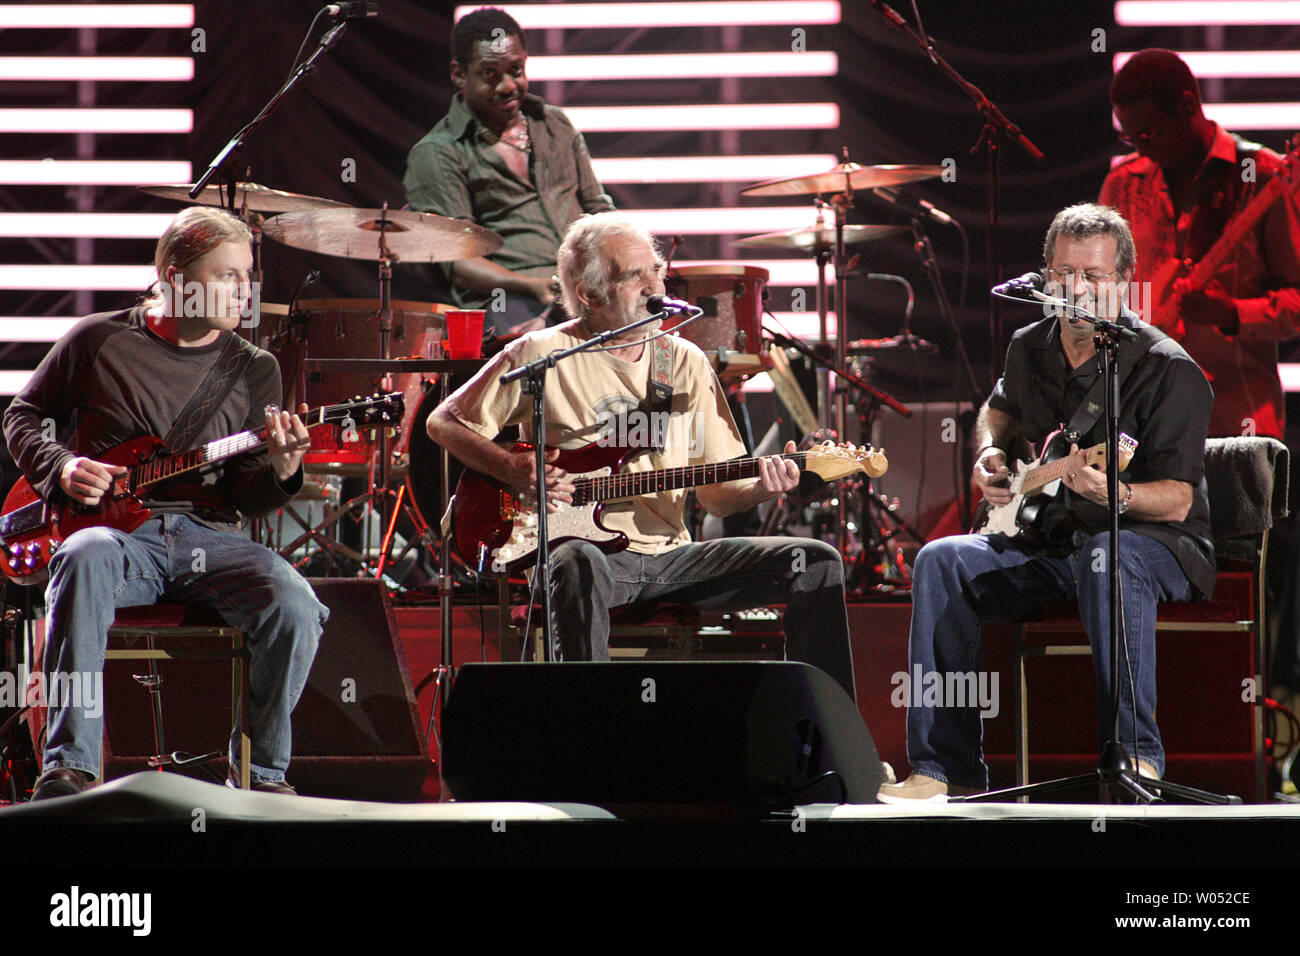 Derek Trucks, drummer Steve Jordan, J.J. Cale, Eric Clapton, and Willie Weeks (L-R) perform in concert at the ipayOne Center in San Diego on March 15, 2007.   (UPI Photo/Roger Williams) Stock Photo